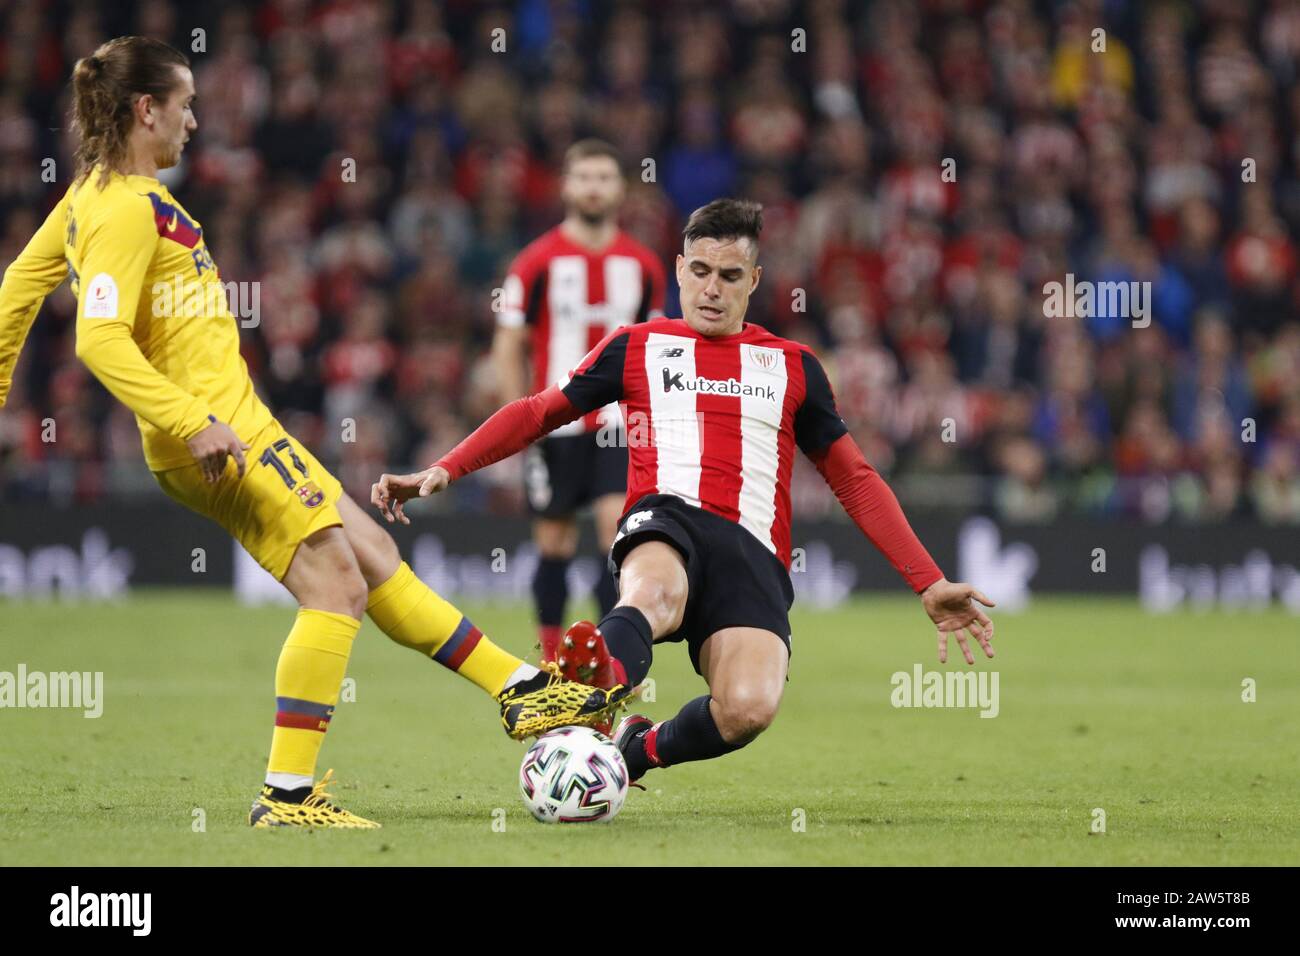 Bilbao, Bizkaia, SPAIN. 6th Feb, 2020. DANI GARCIA (14) tries to win the ball with a dive during the game between Athletic Club and FC Barcelona. The Athletic Club hosted FC Barcelona for the quarter-finals Copa del Rey match at San Mames stadium, in Bilbao. Credit: Edu Del Fresno/ZUMA Wire/Alamy Live News Stock Photo